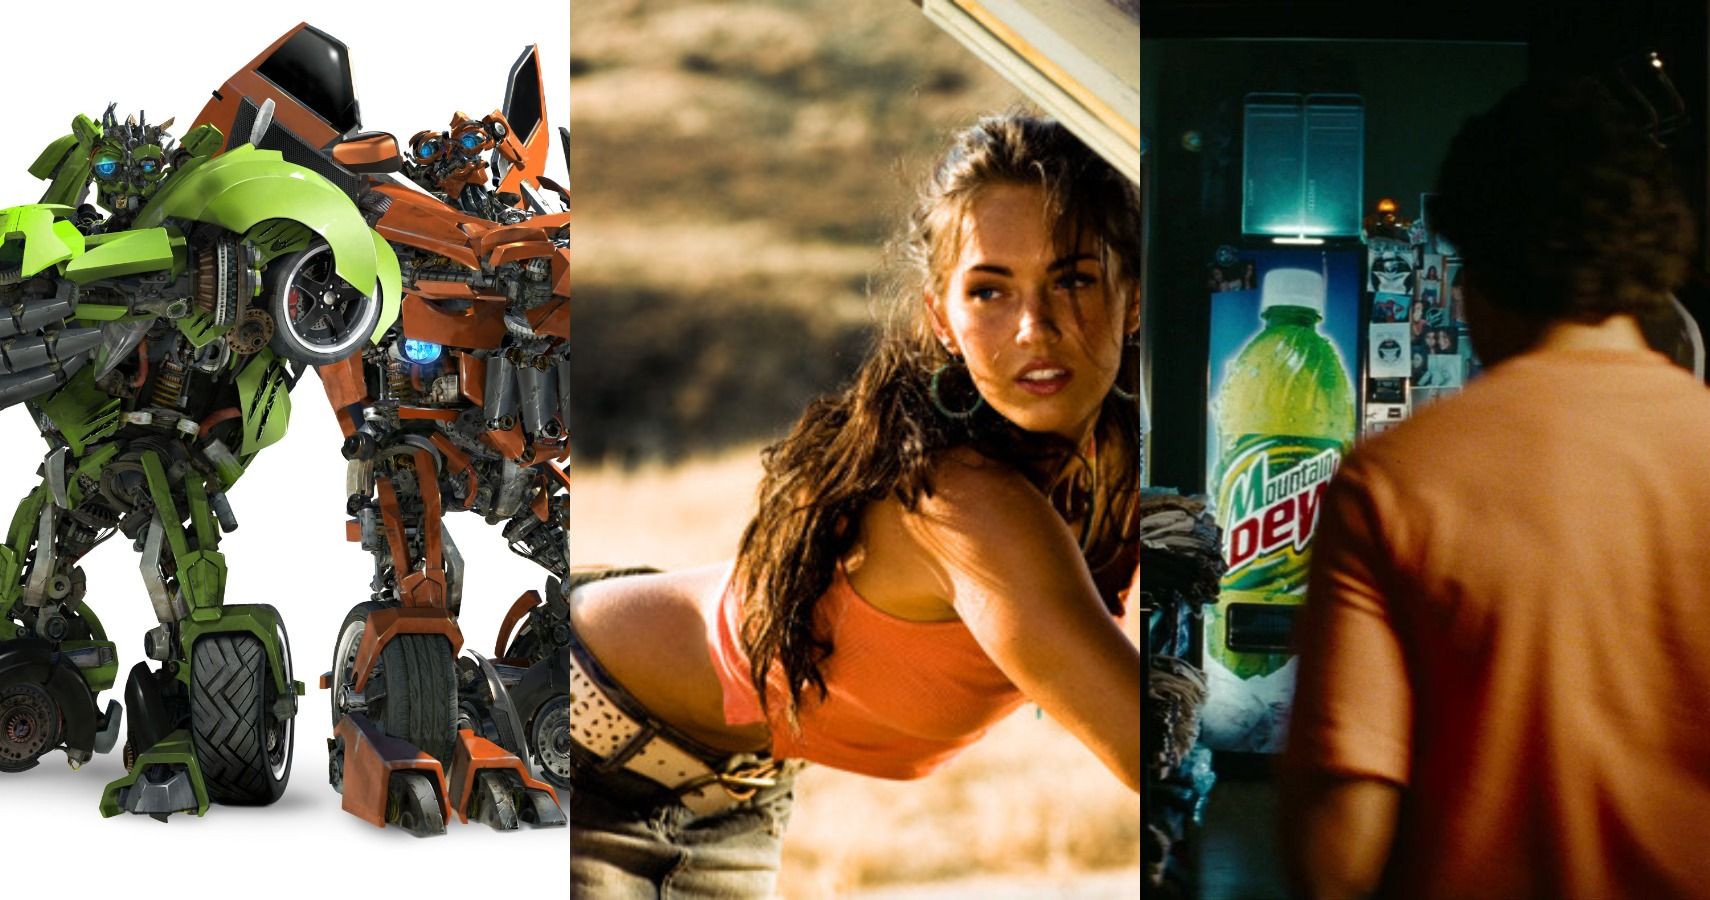 A combined image featuring several criticized characters and moments from Michael Bay's Transformers movies.